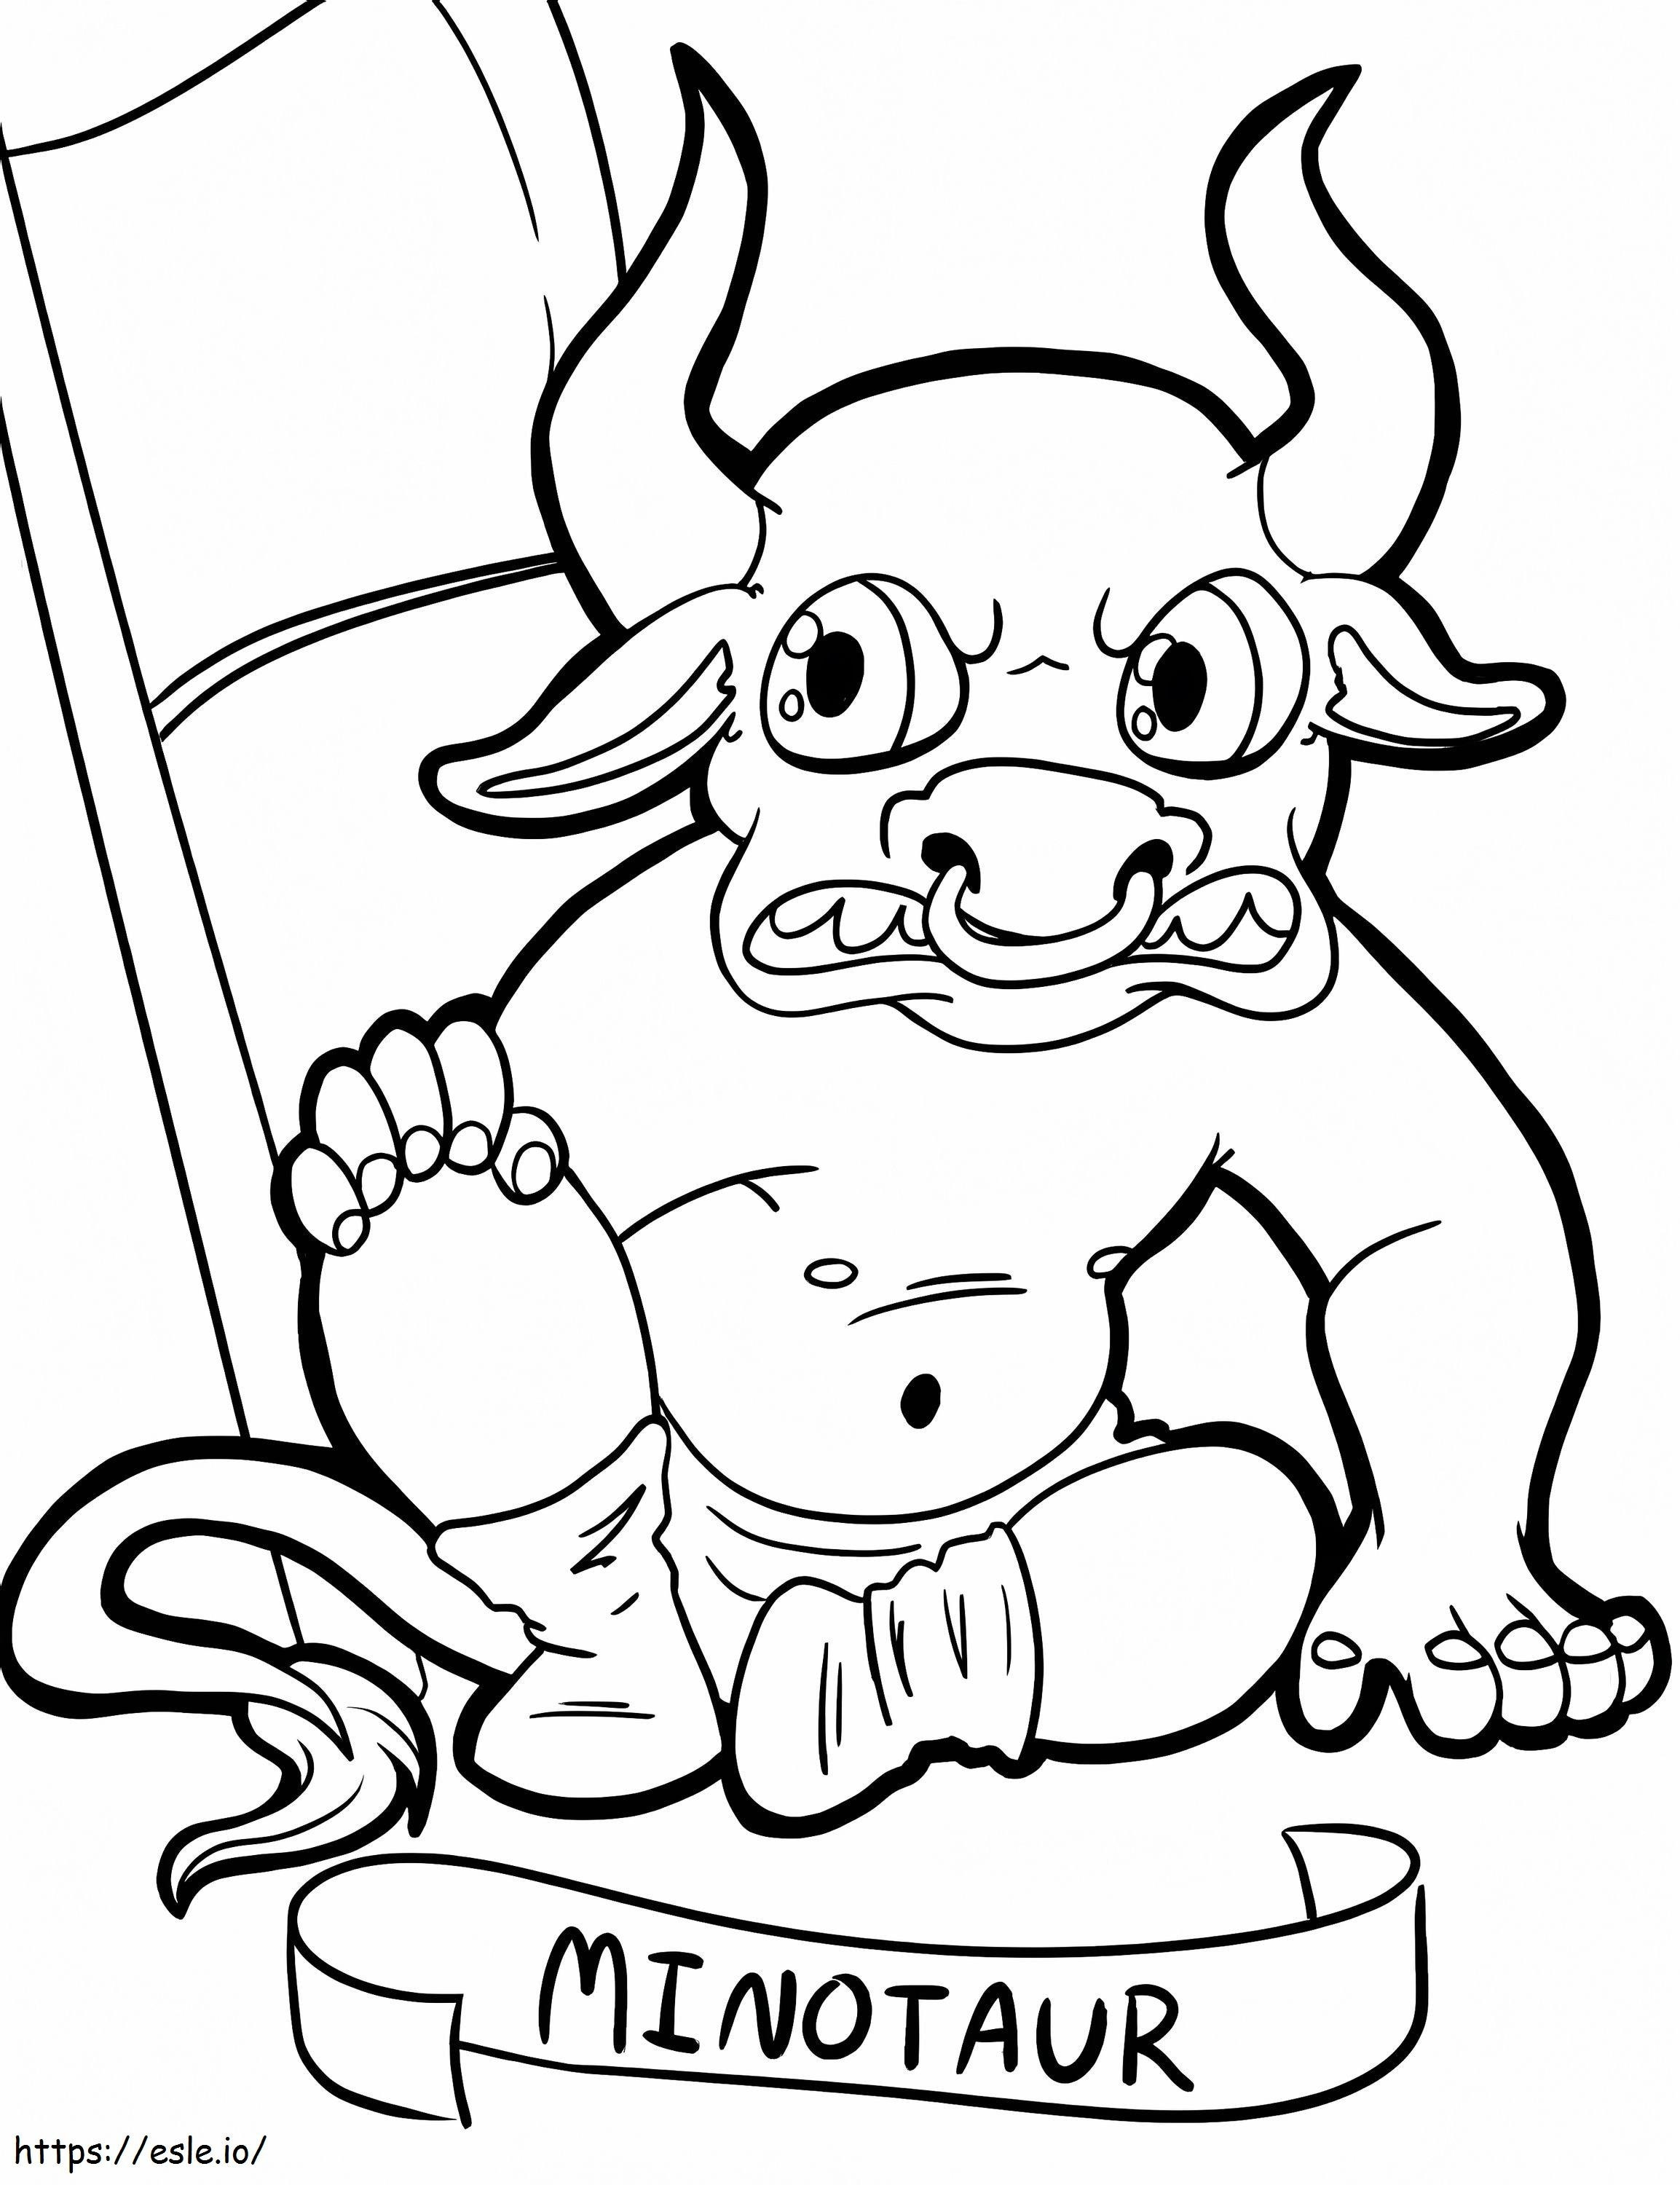 Angry Minotaur coloring page